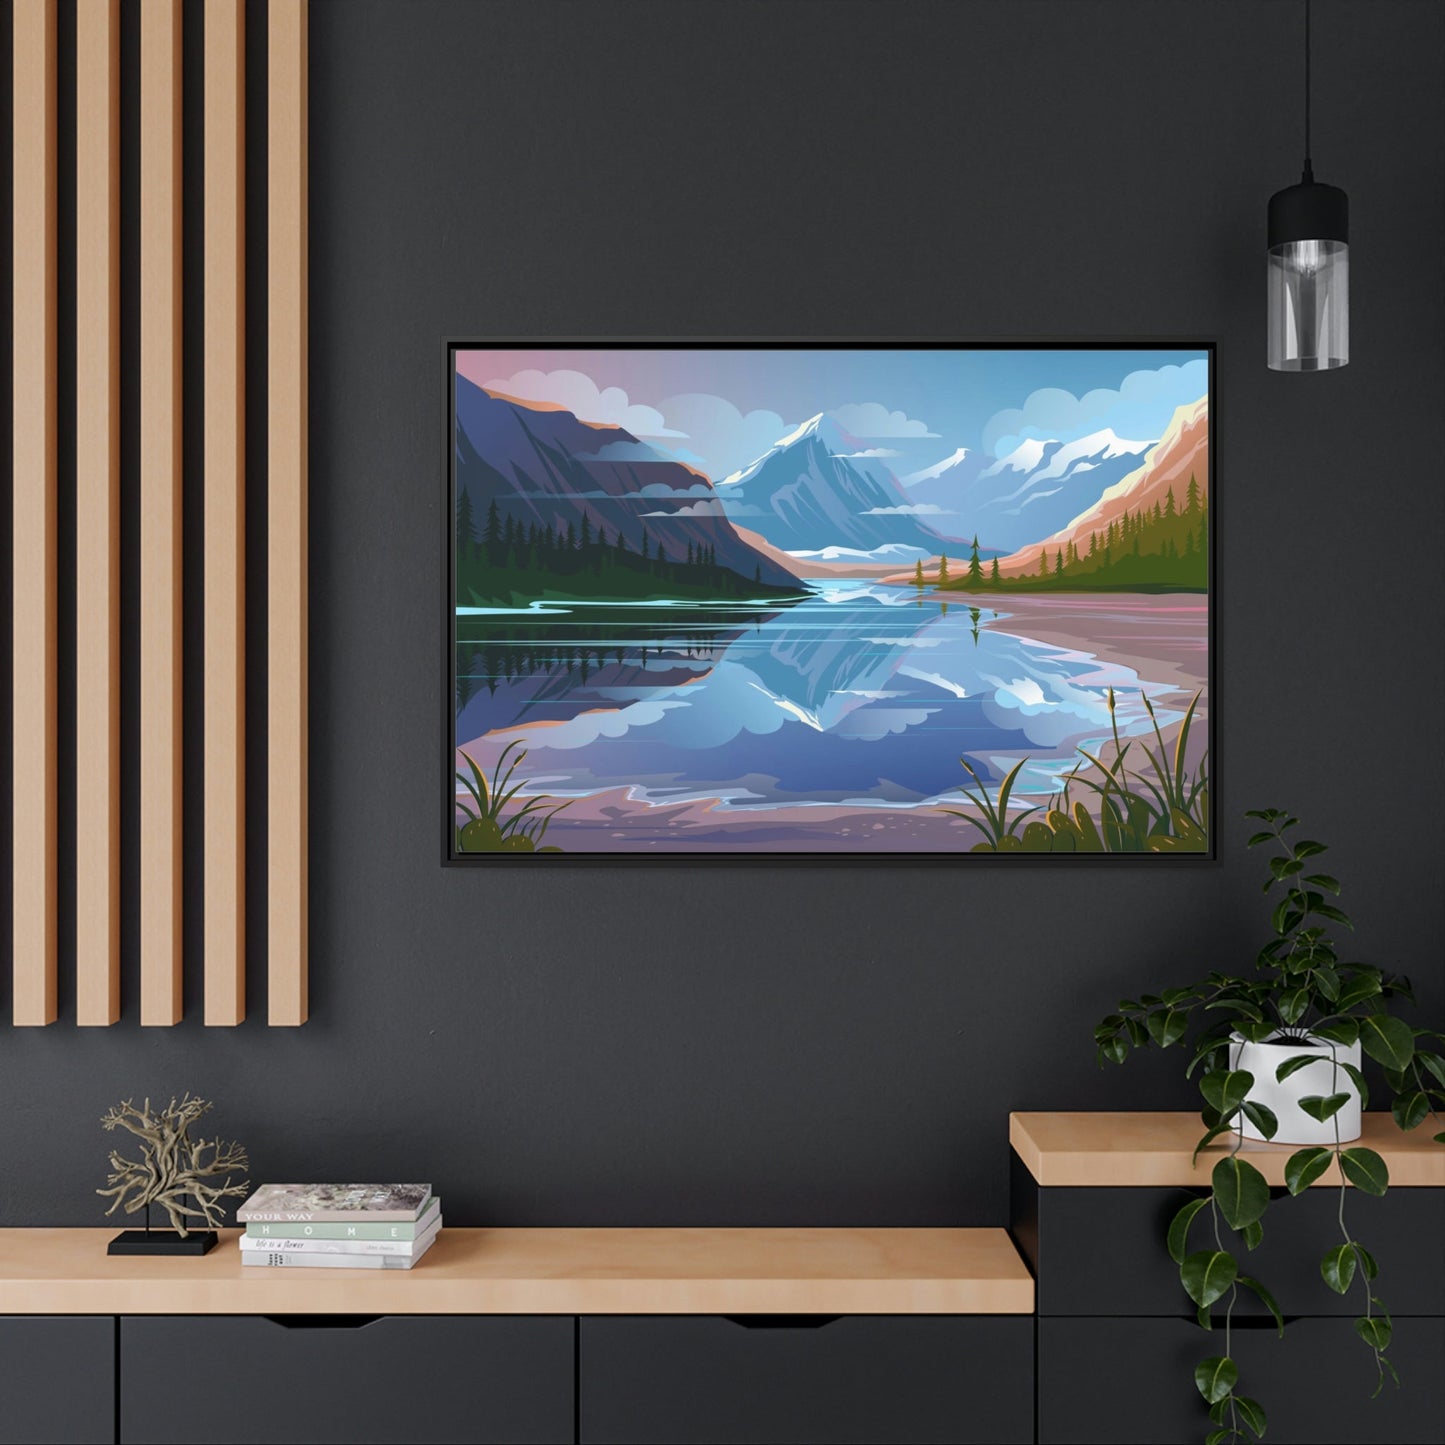 Reflections of Serenity: Natural Canvas Wall Art of Tranquil Lakes and Rivers